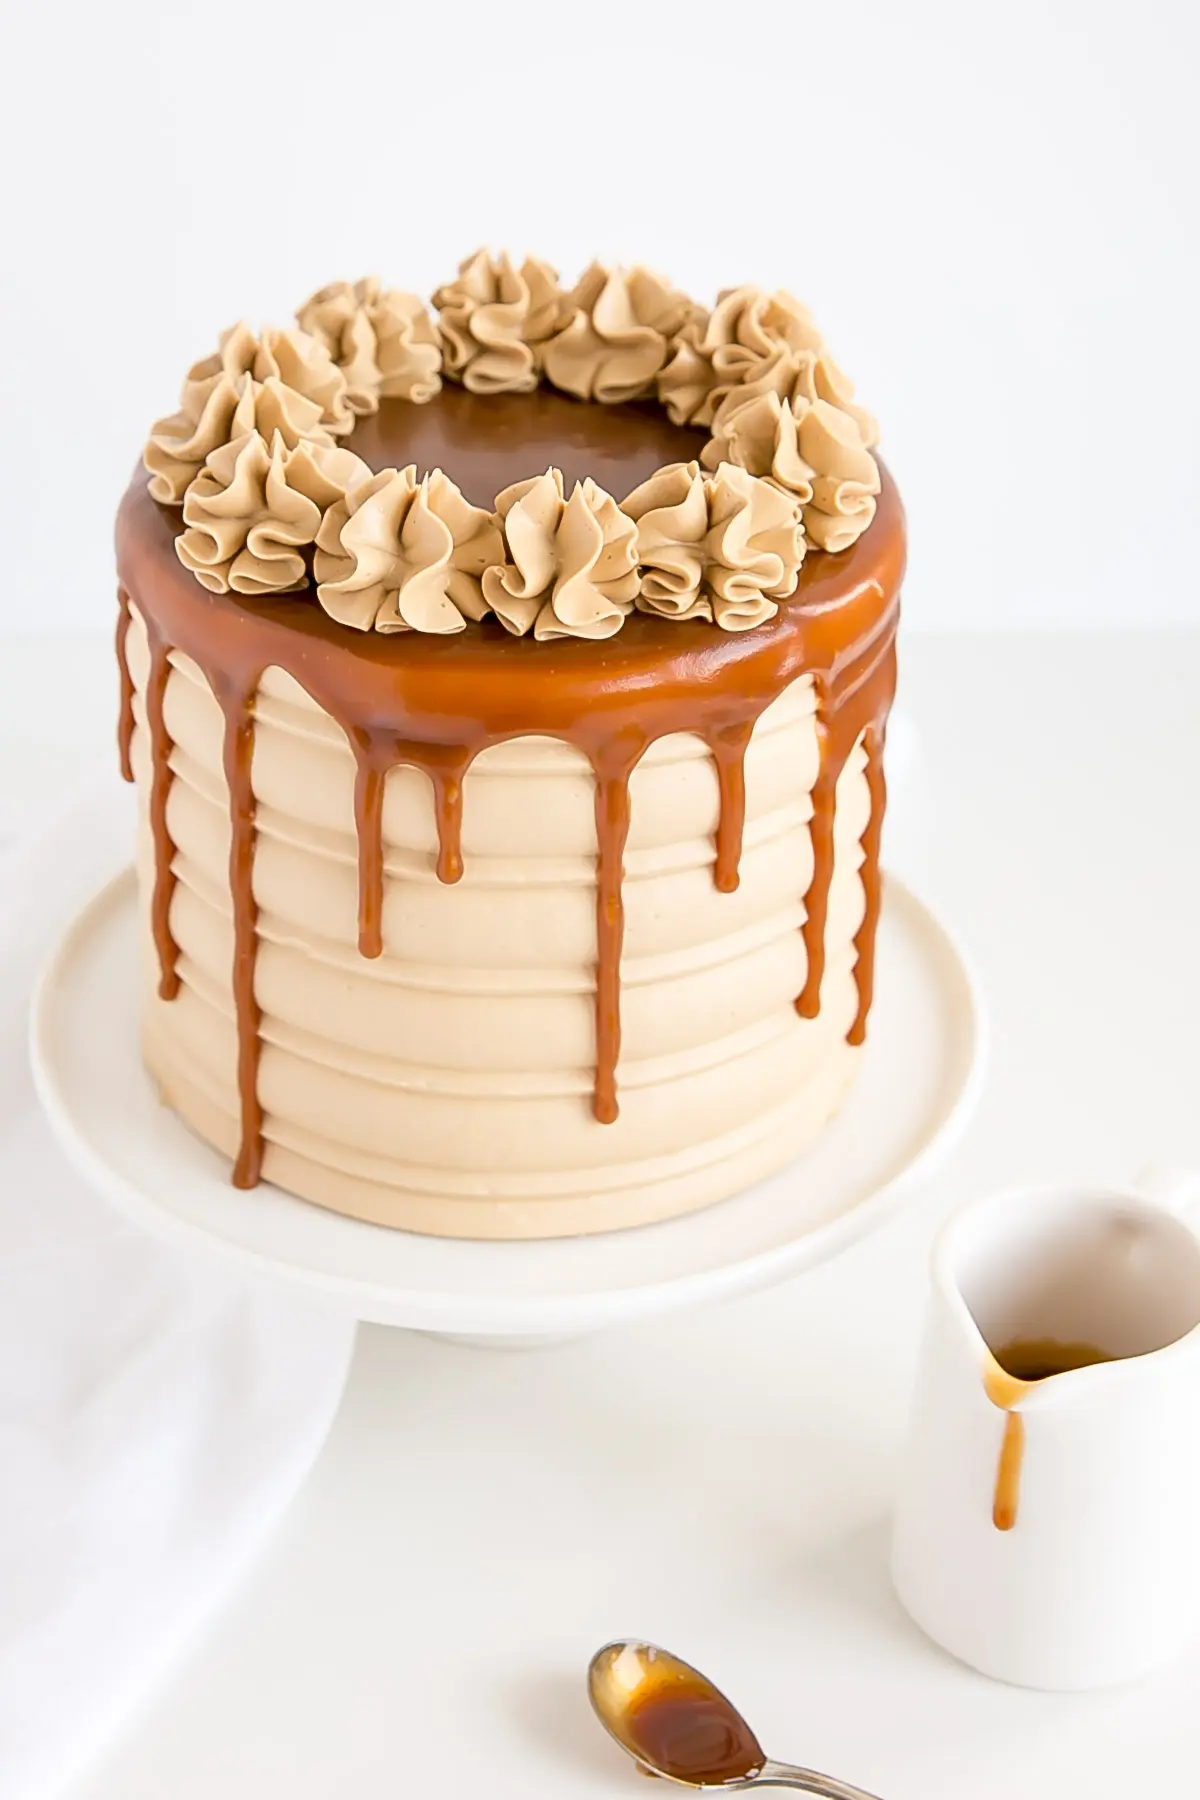 Caramel Cake with a caramel drip and rosettes on top.